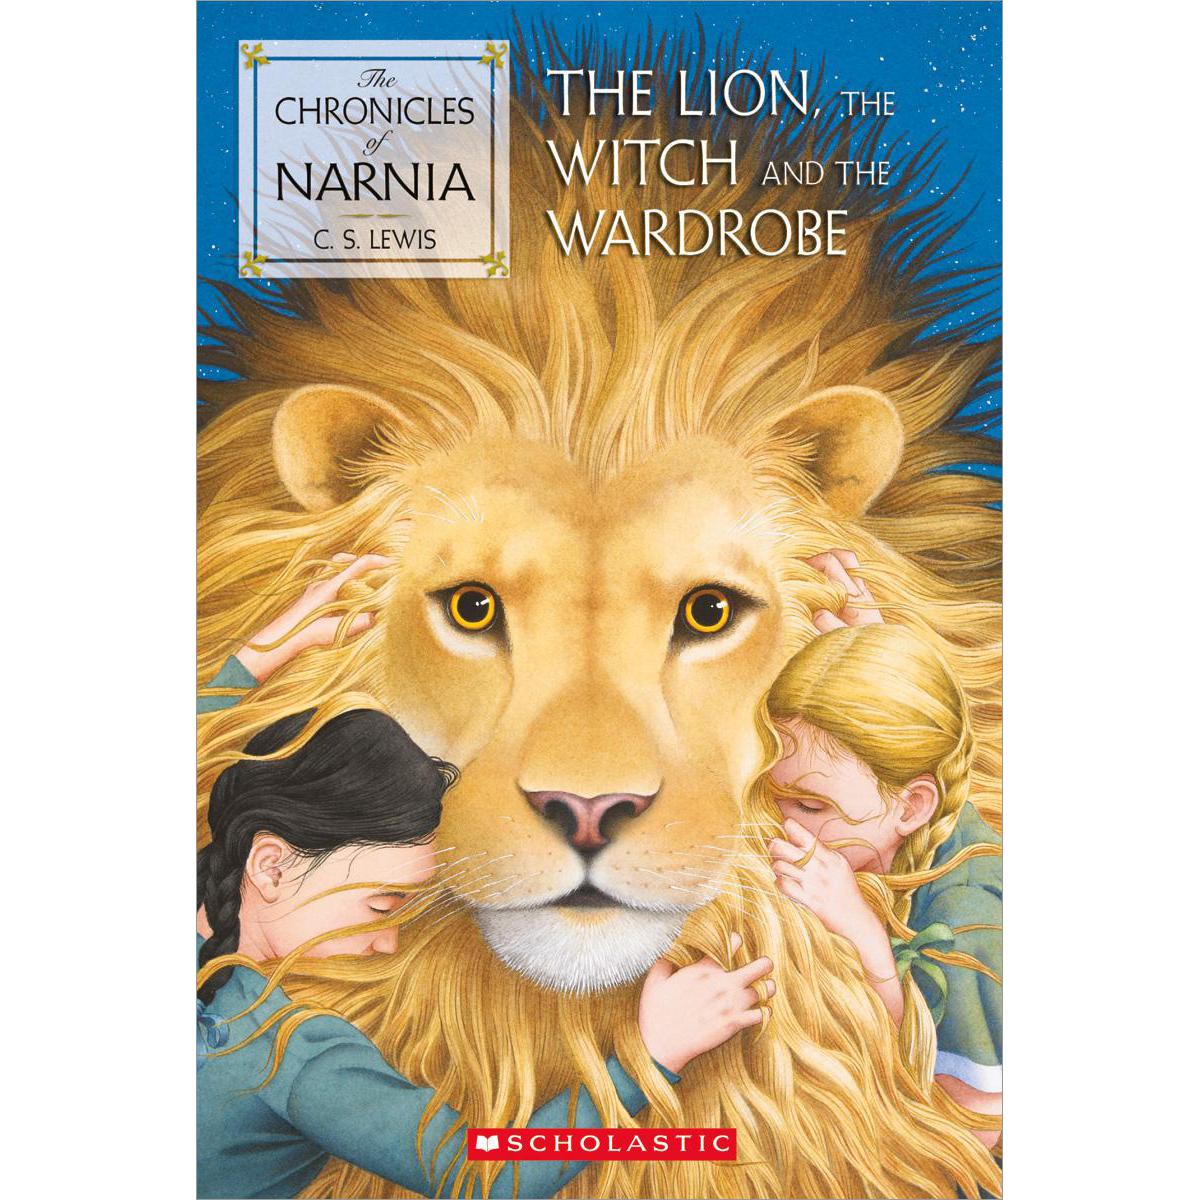  The Chronicles of Narnia: The Lion, the Witch and the Wardrobe 10-Pack 